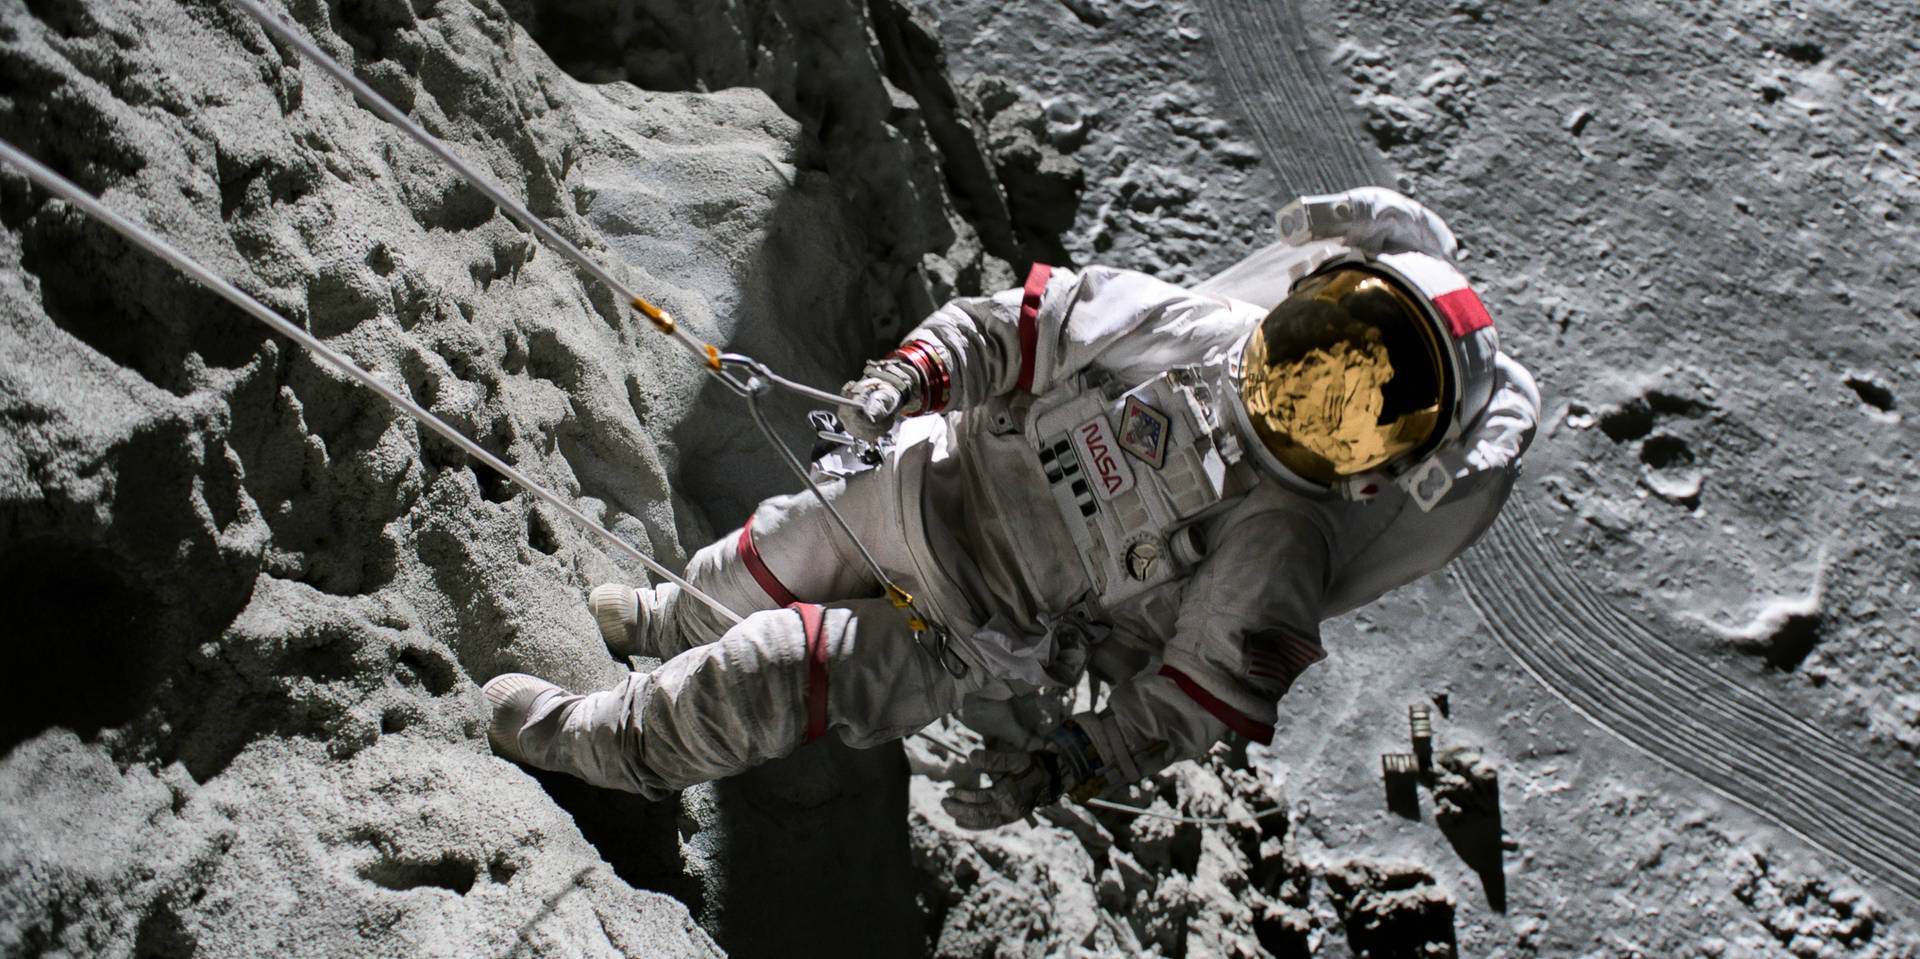 For All Mankind Moon Rock Climbing Background